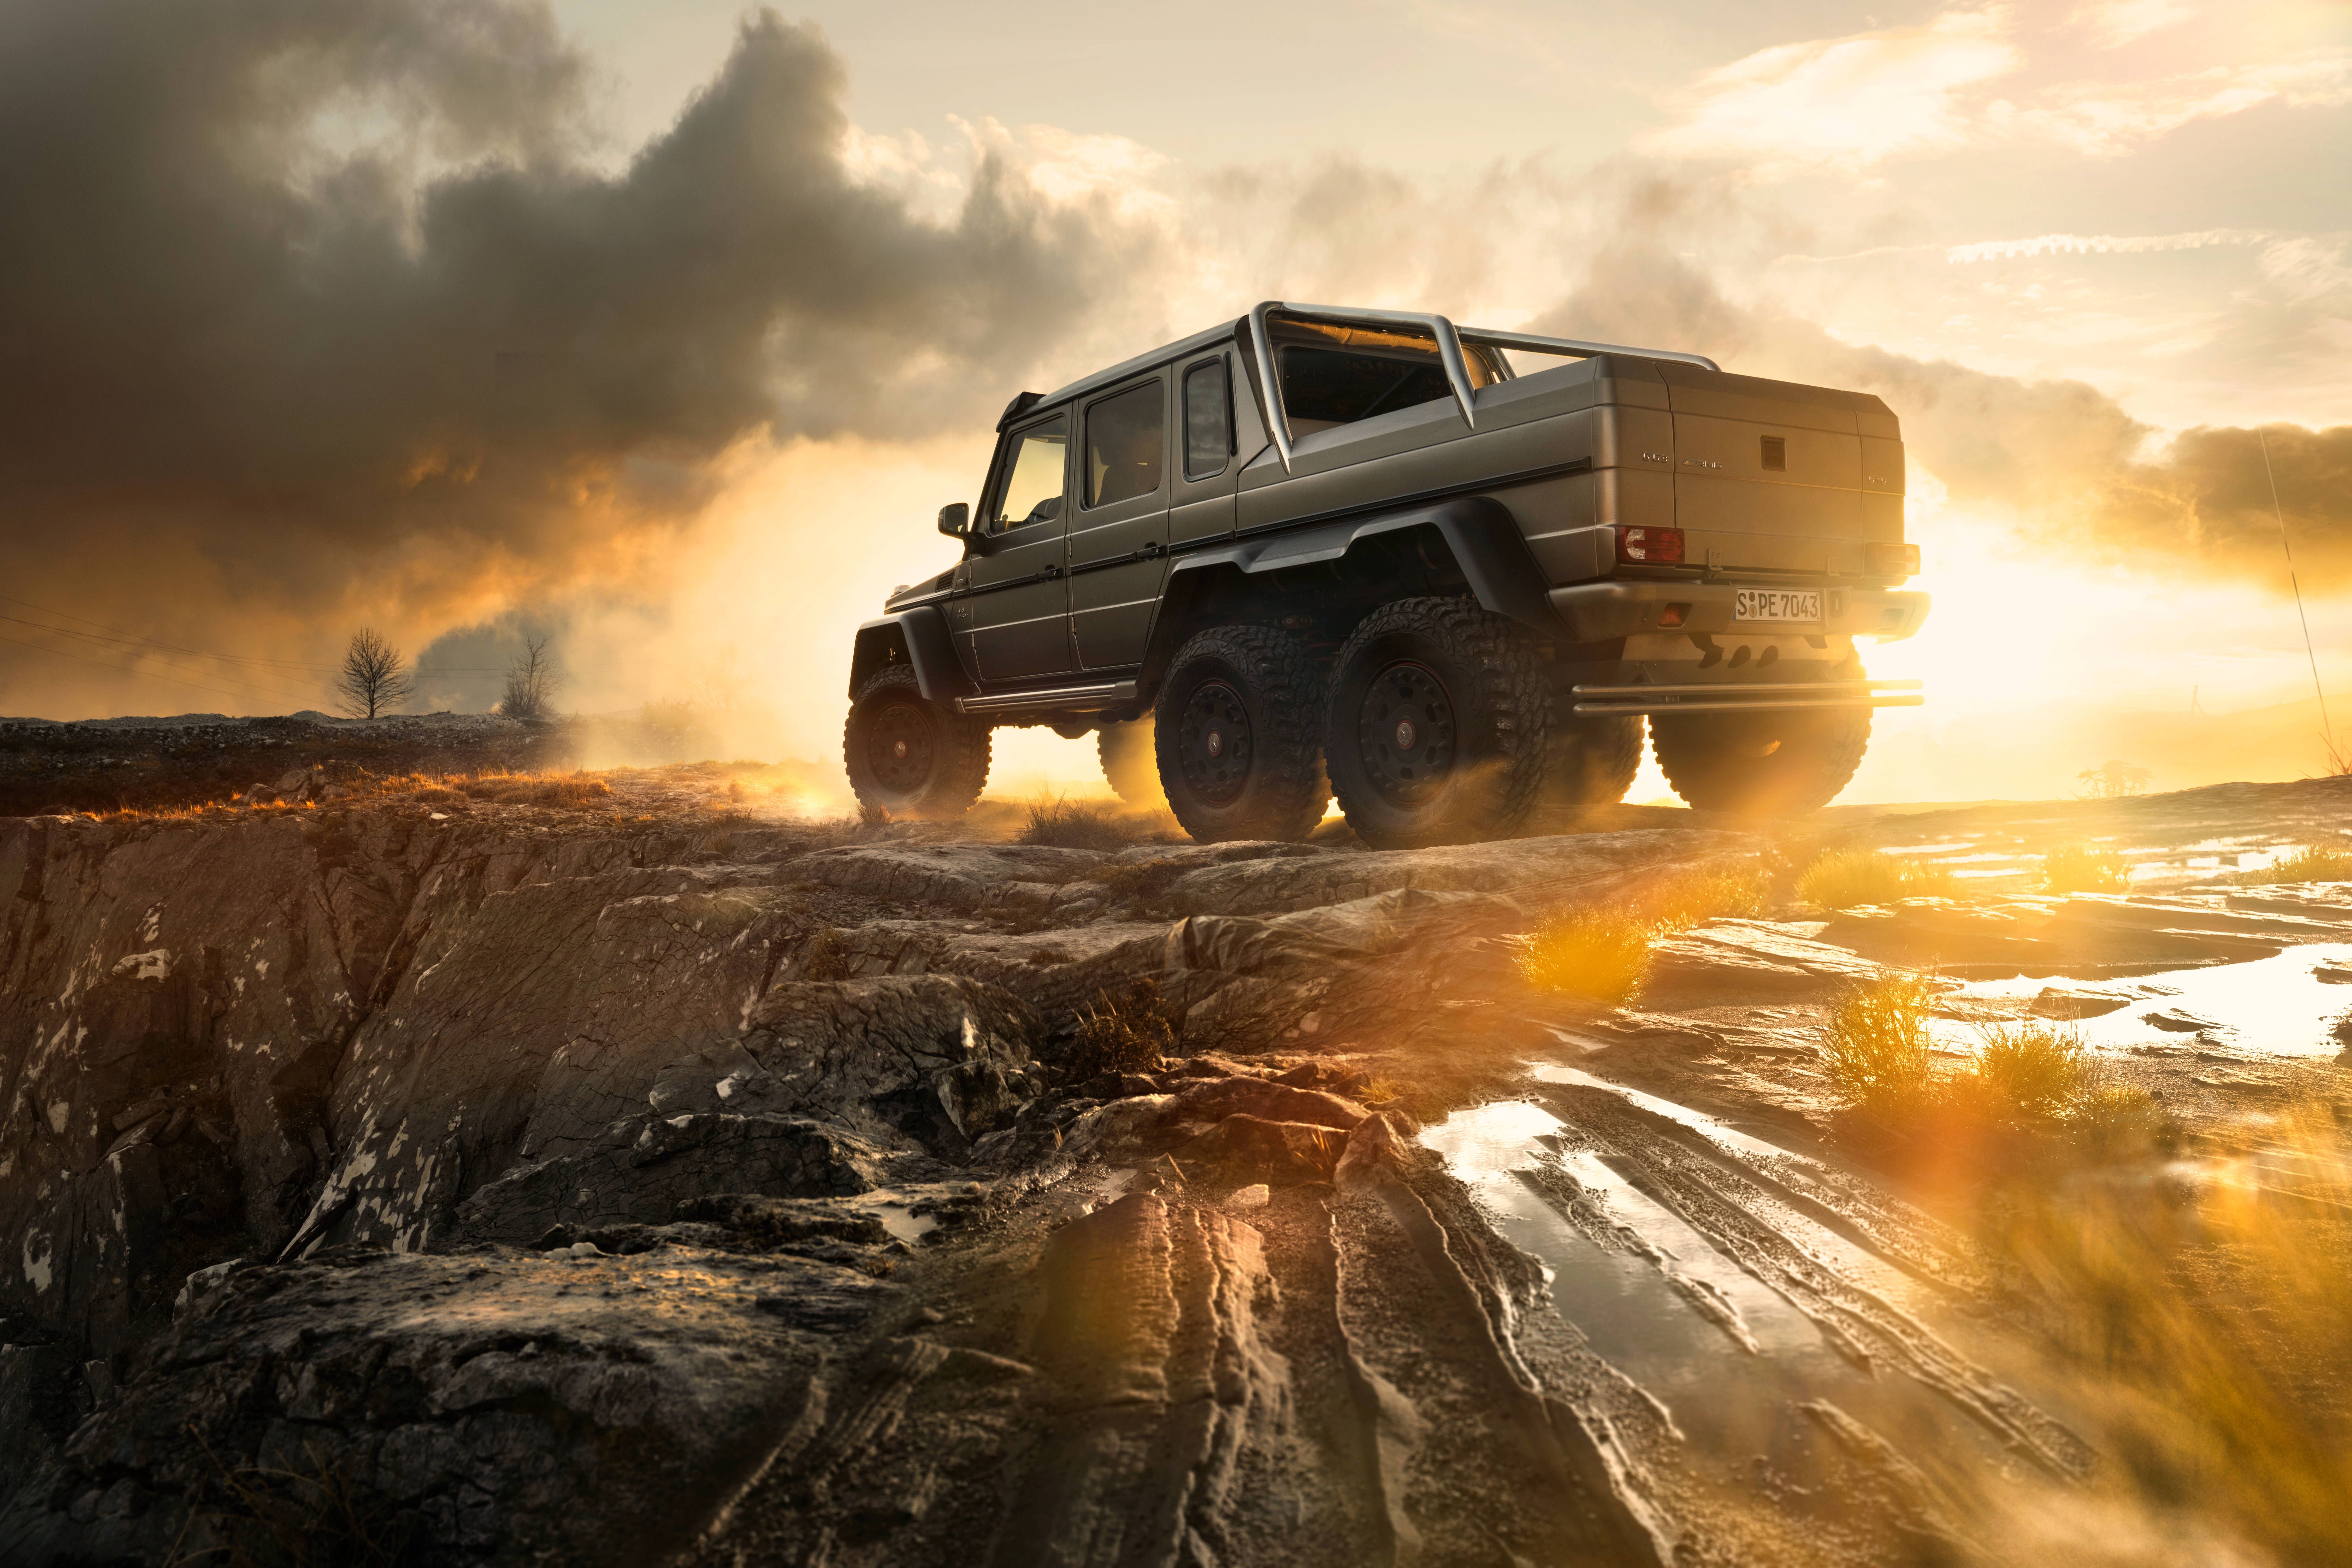 Mercedes Benz AMG G63 6x6 8k, HD Cars, 4k Wallpapers, Image, Backgrounds, Photos and Pictures